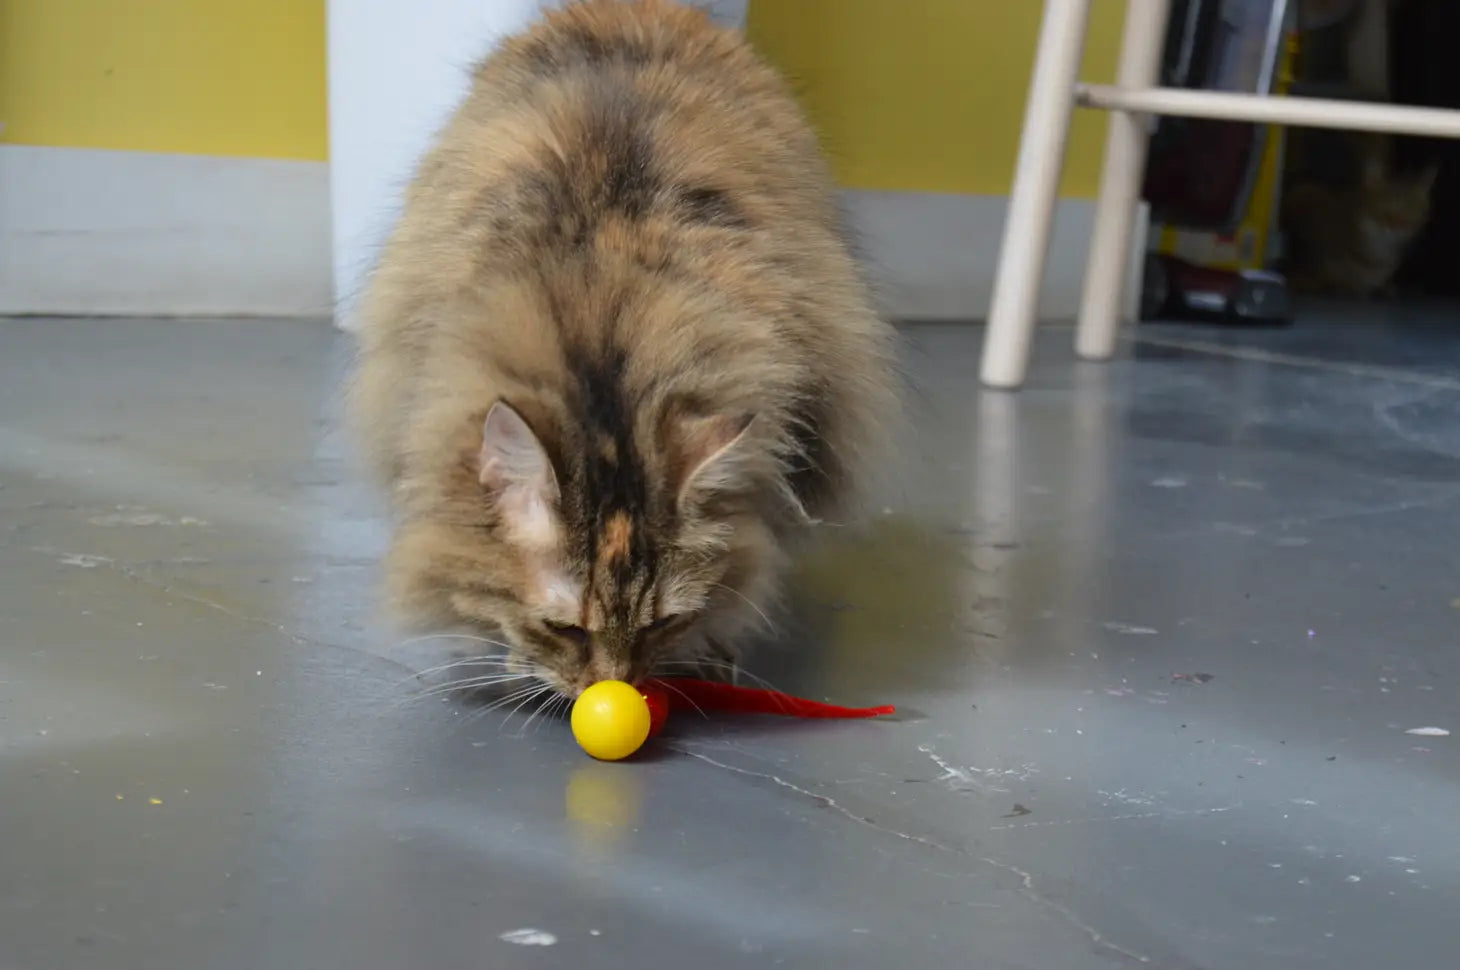 Cat Toy Ball Wiggly Ping